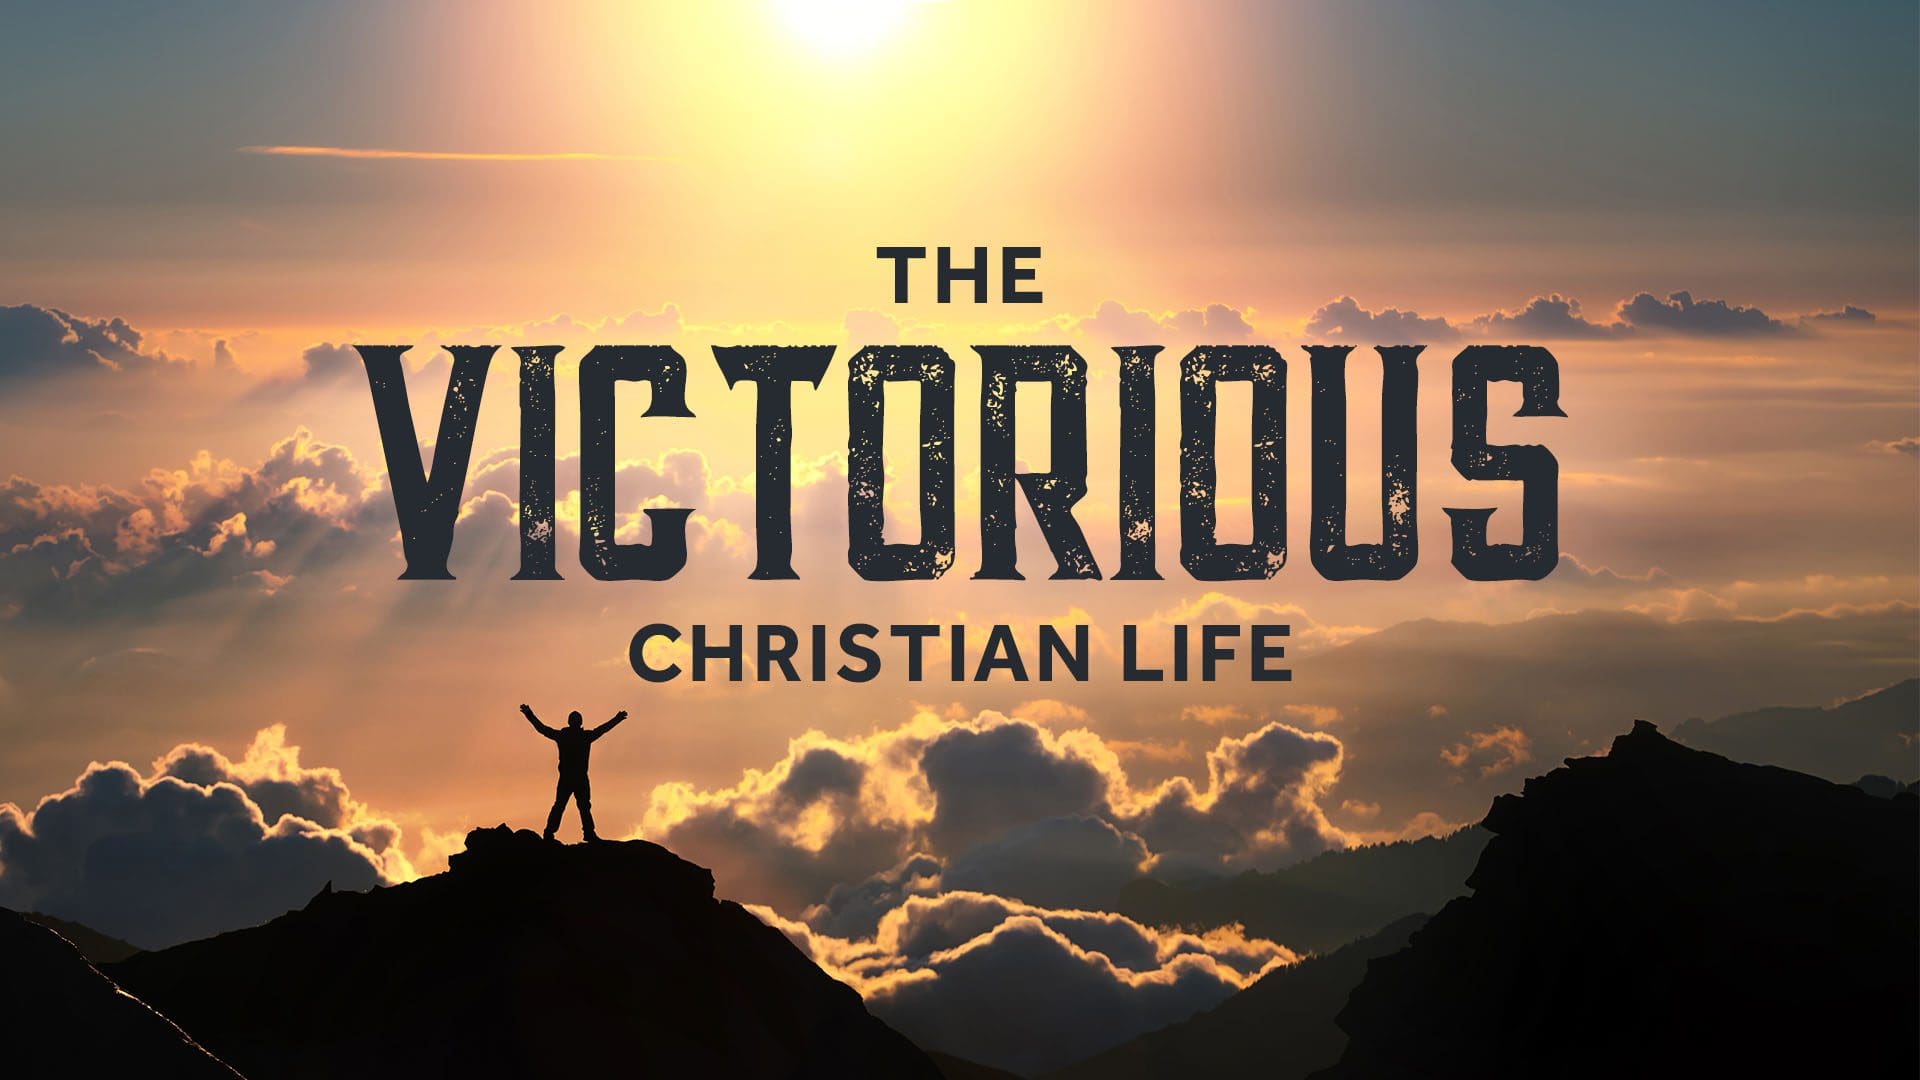 The Victorious Christian Life Image